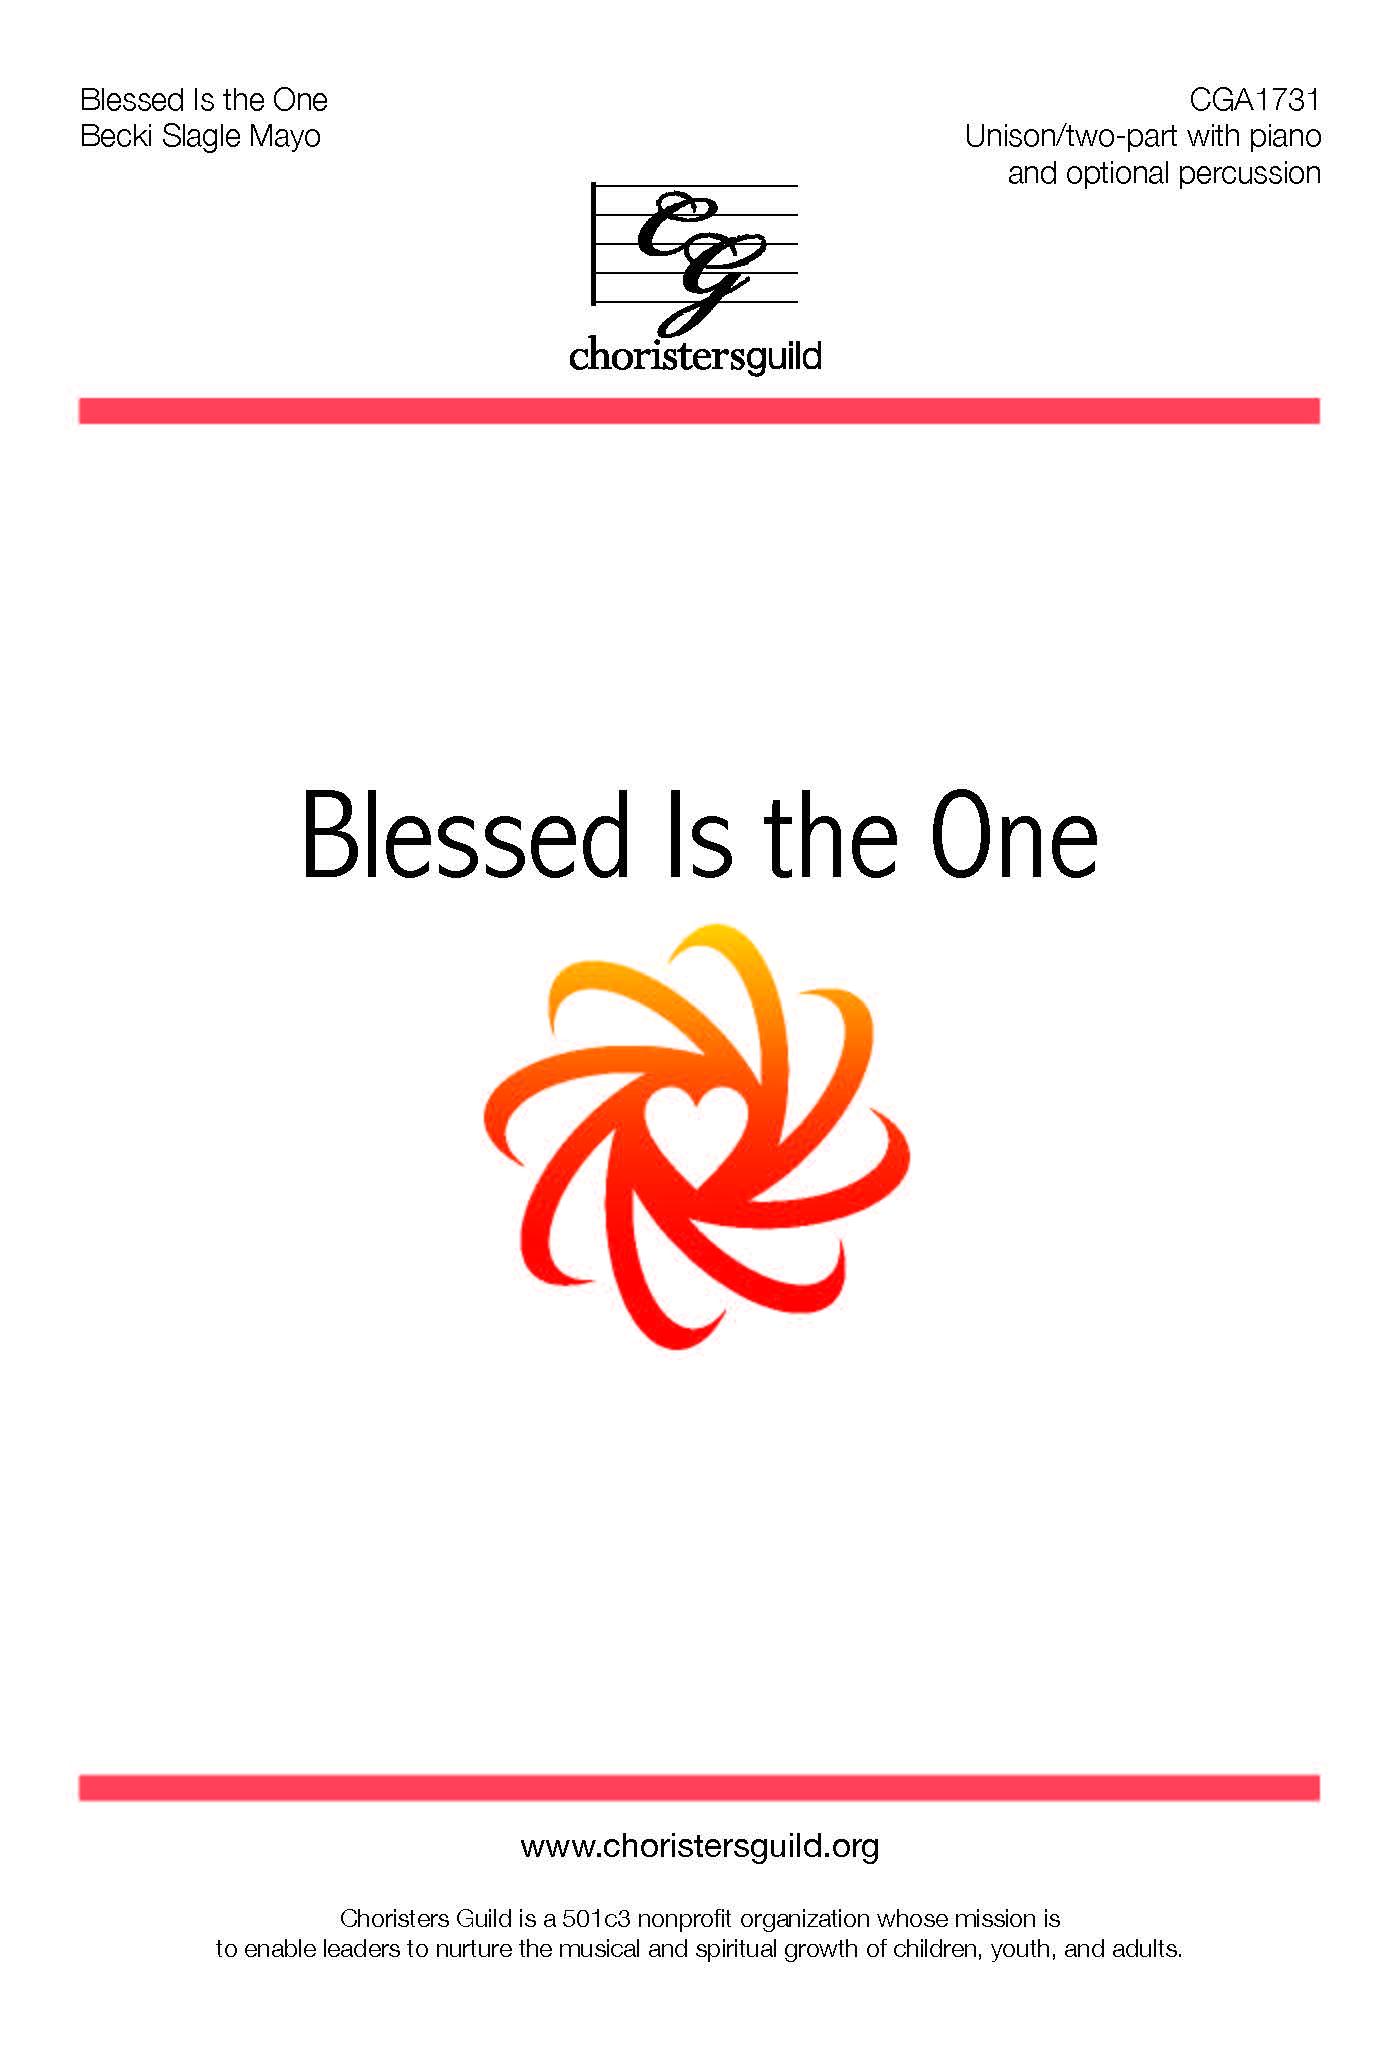 Blessed Is the One - Unison/Two-part